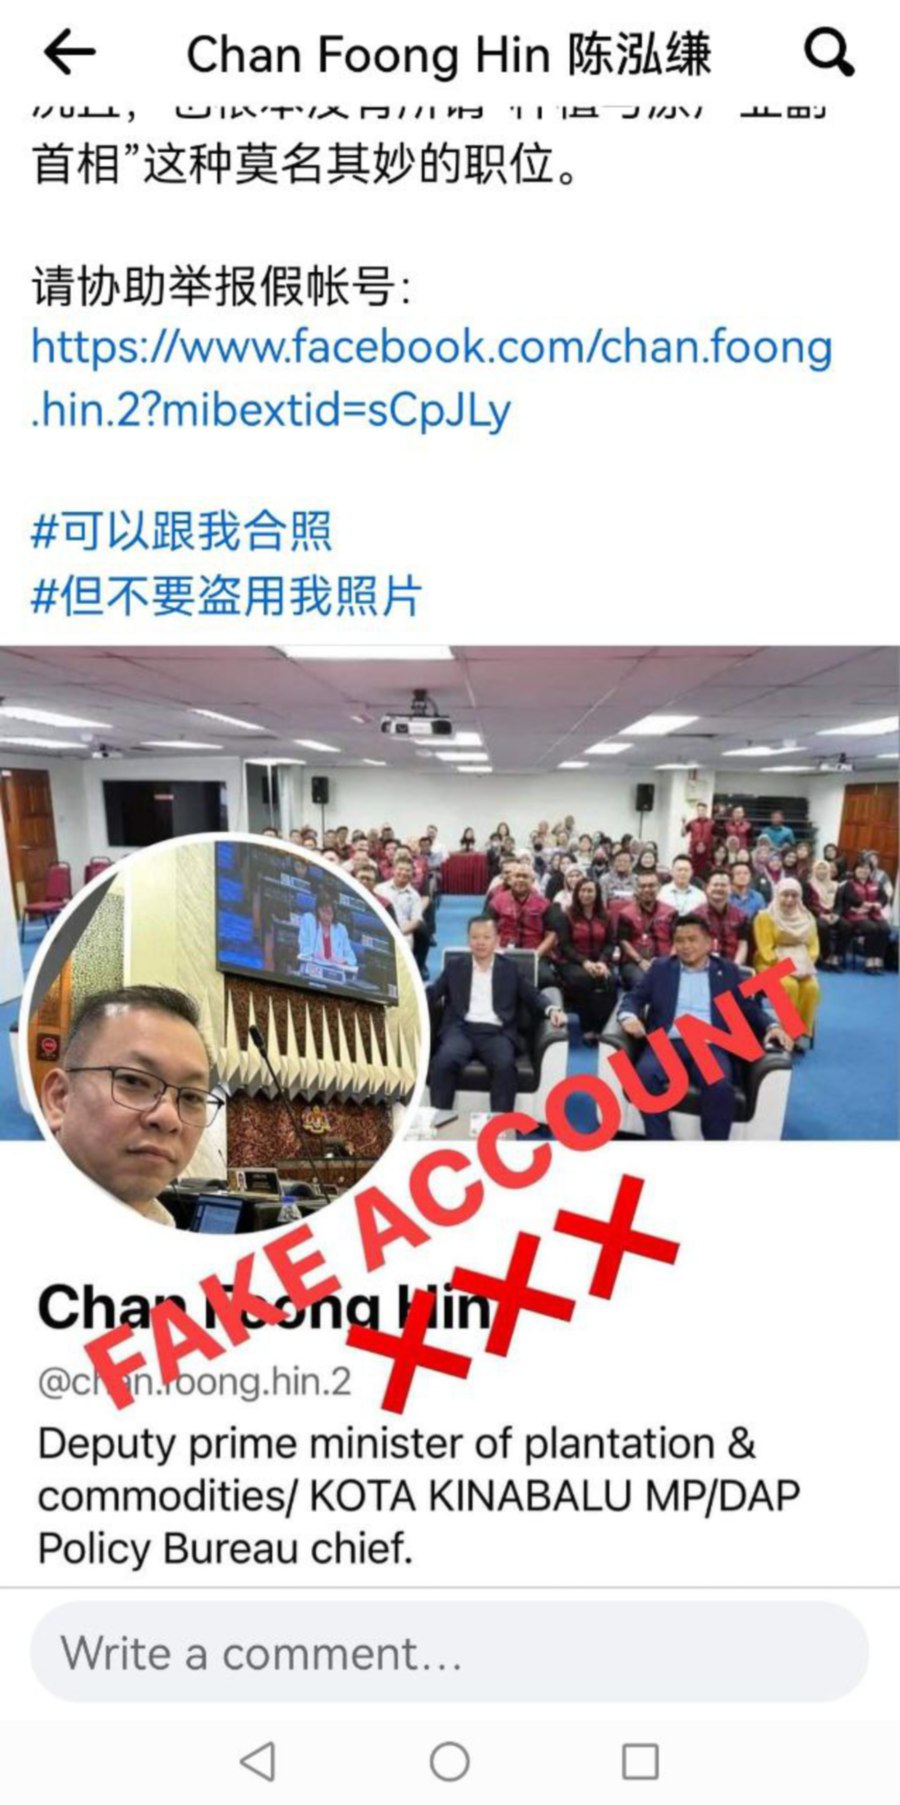 Deputy Agriculture and Food Security Minister Datuk Chan Foong Hin today clarified that the Facebook account under the name ‘Chan Foong Hin’ does not belong to him and it is fake.- Source from social media